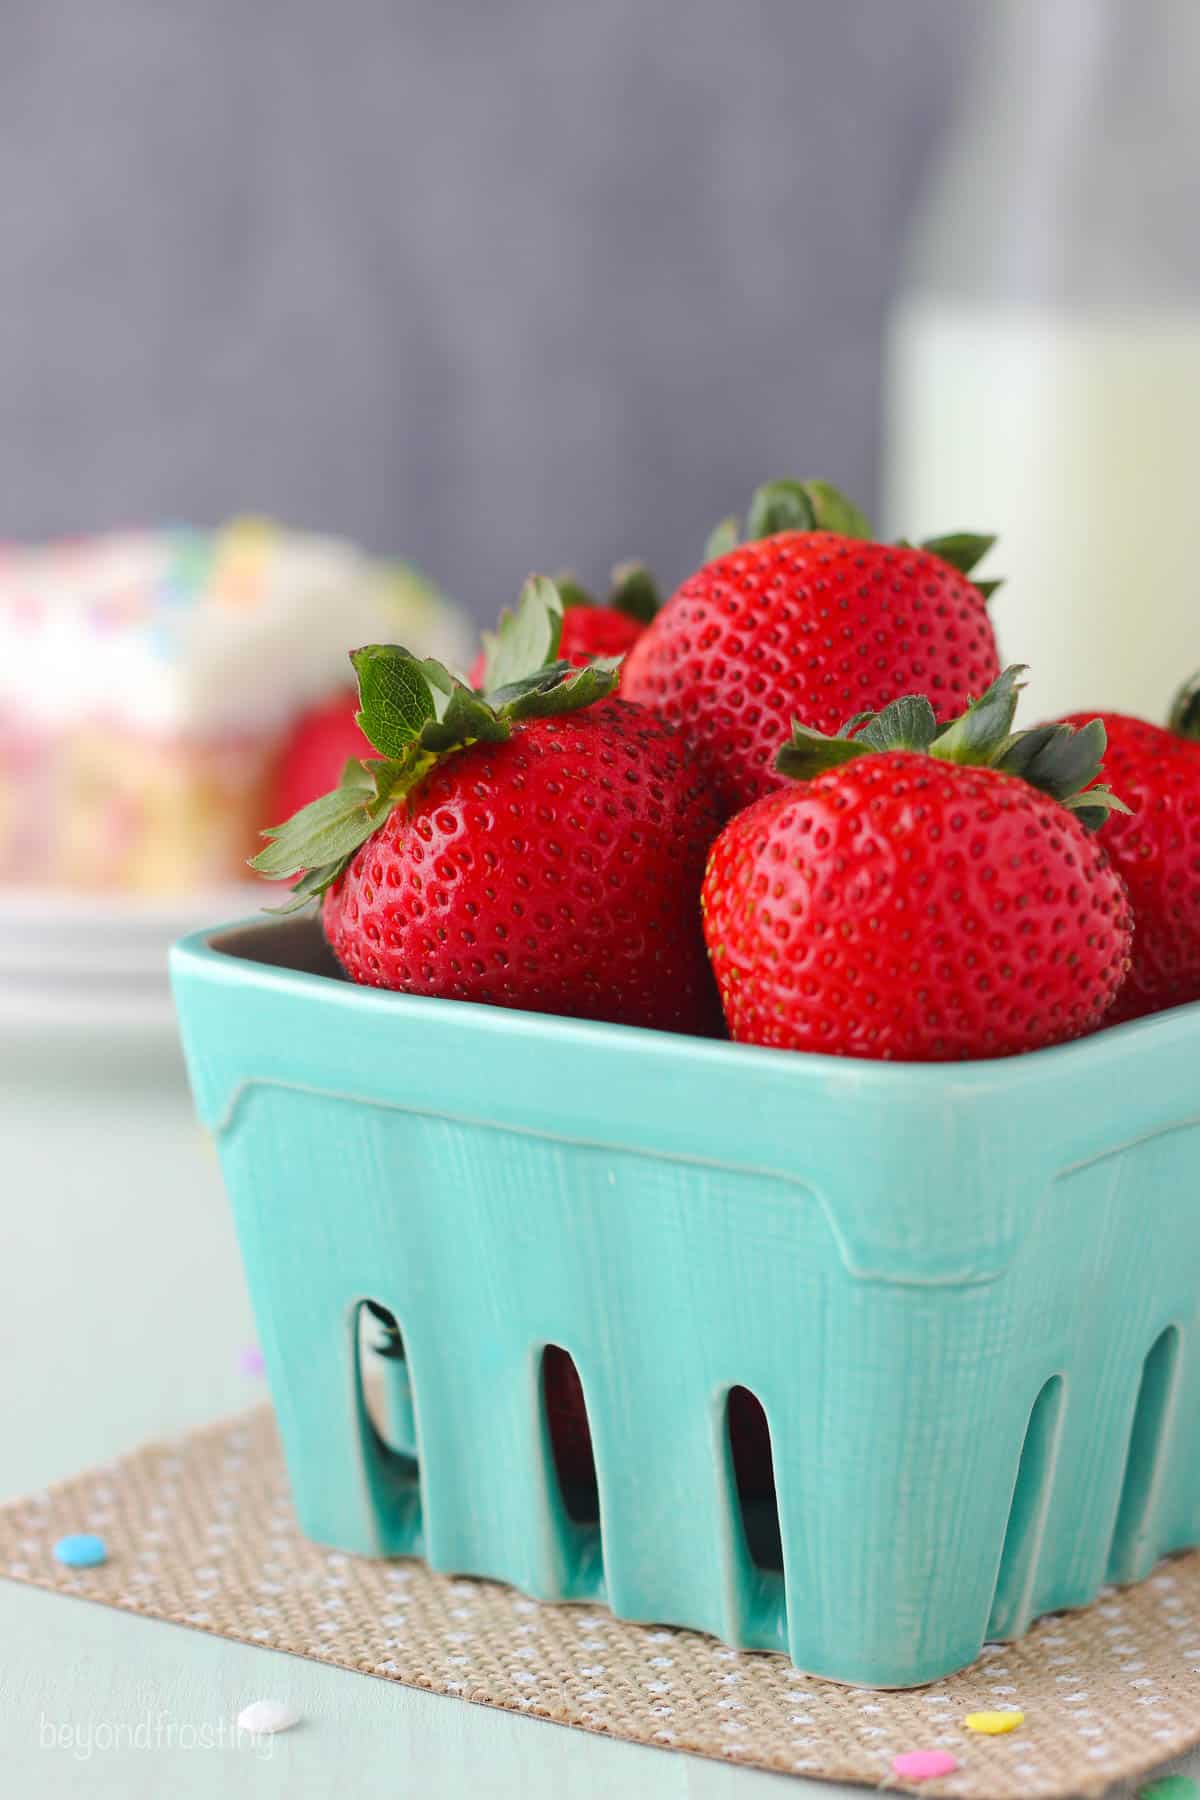 a carton of strawberries from the side